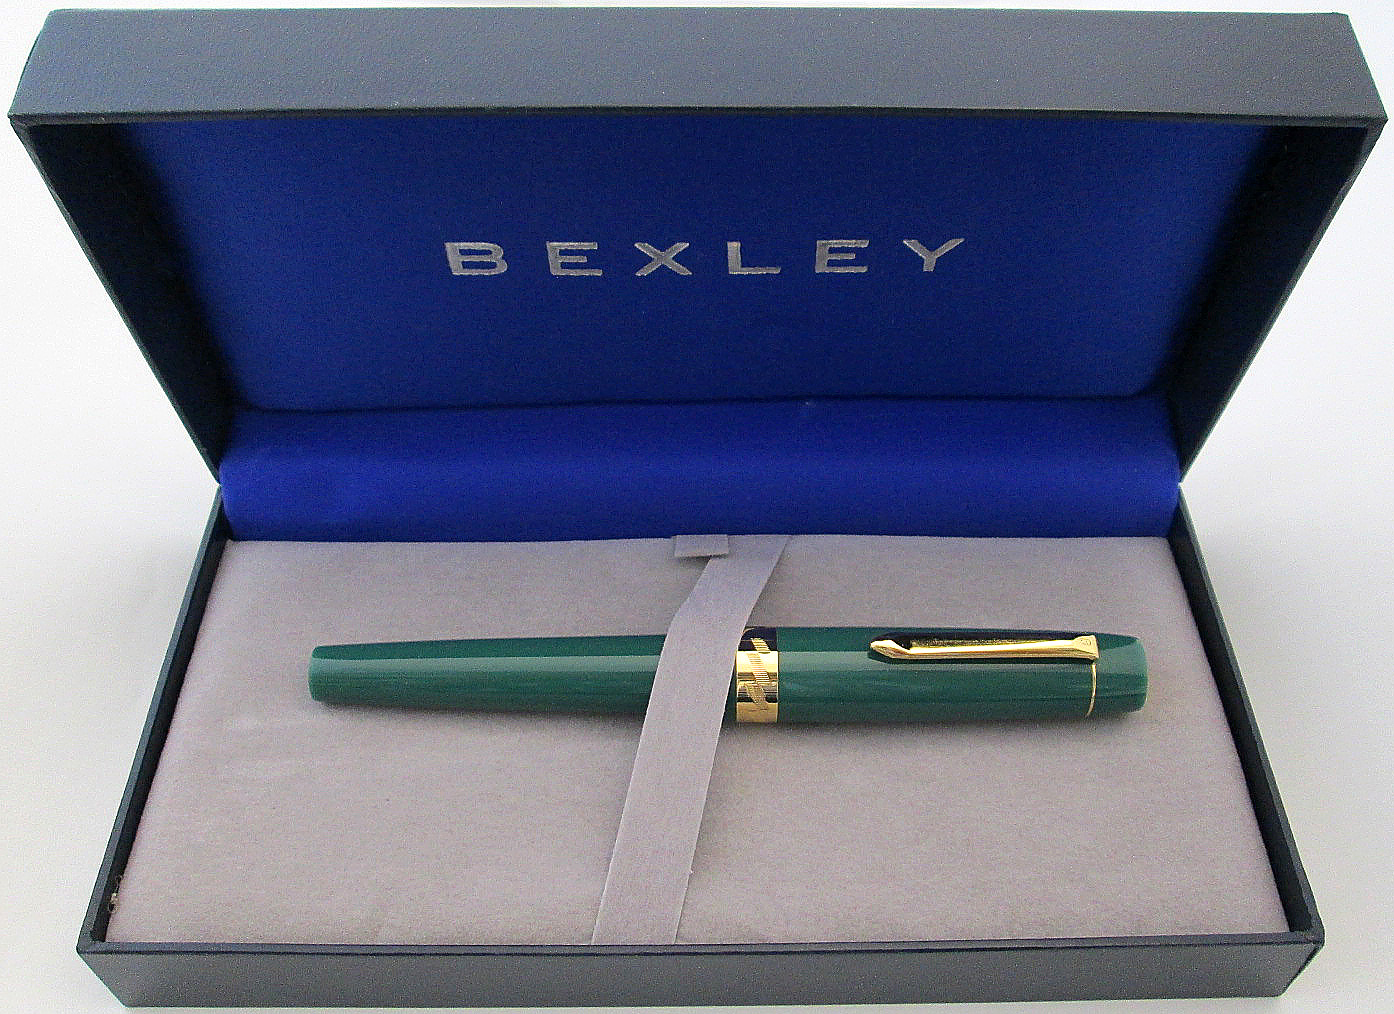 Bexley Pen, you know the quality and care used in our design and manufacturing process.  These high quality pens are made from metal and acrylics, with steel and gold nibs, and are piston filled